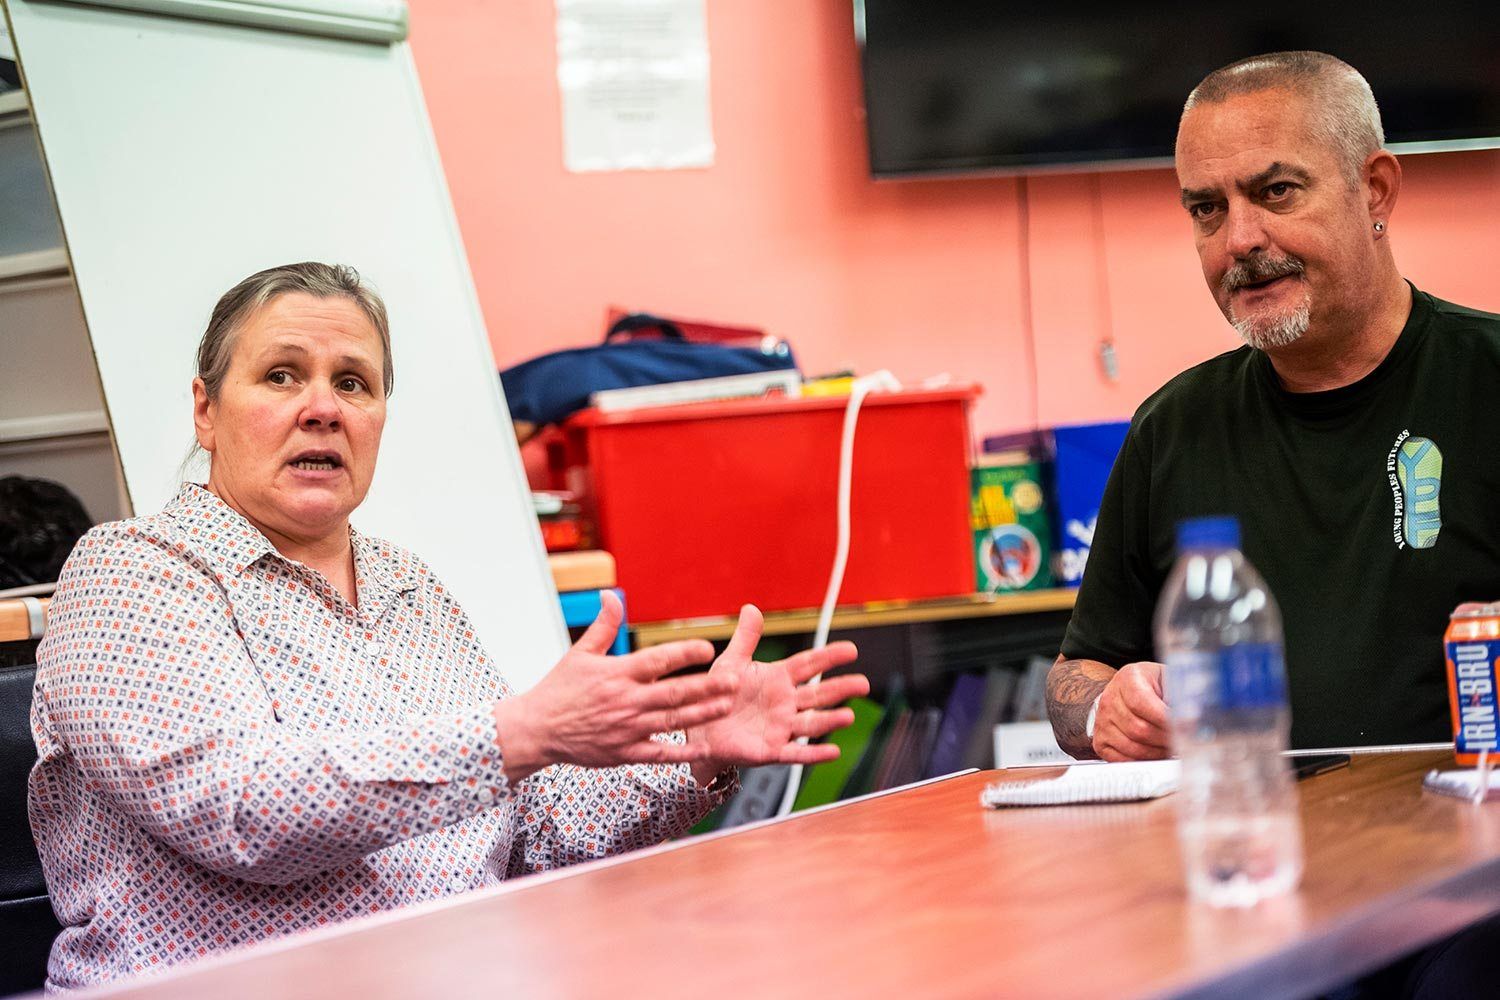 Ann Lawrance, project manager at Young People’s Futures, speaks about the work her organization does in the community as Frank Law, staff member with YPF’s family support service, looks on at Possilpoint Community Centre. Image by Michael Santiago. United Kingdom, 2019.